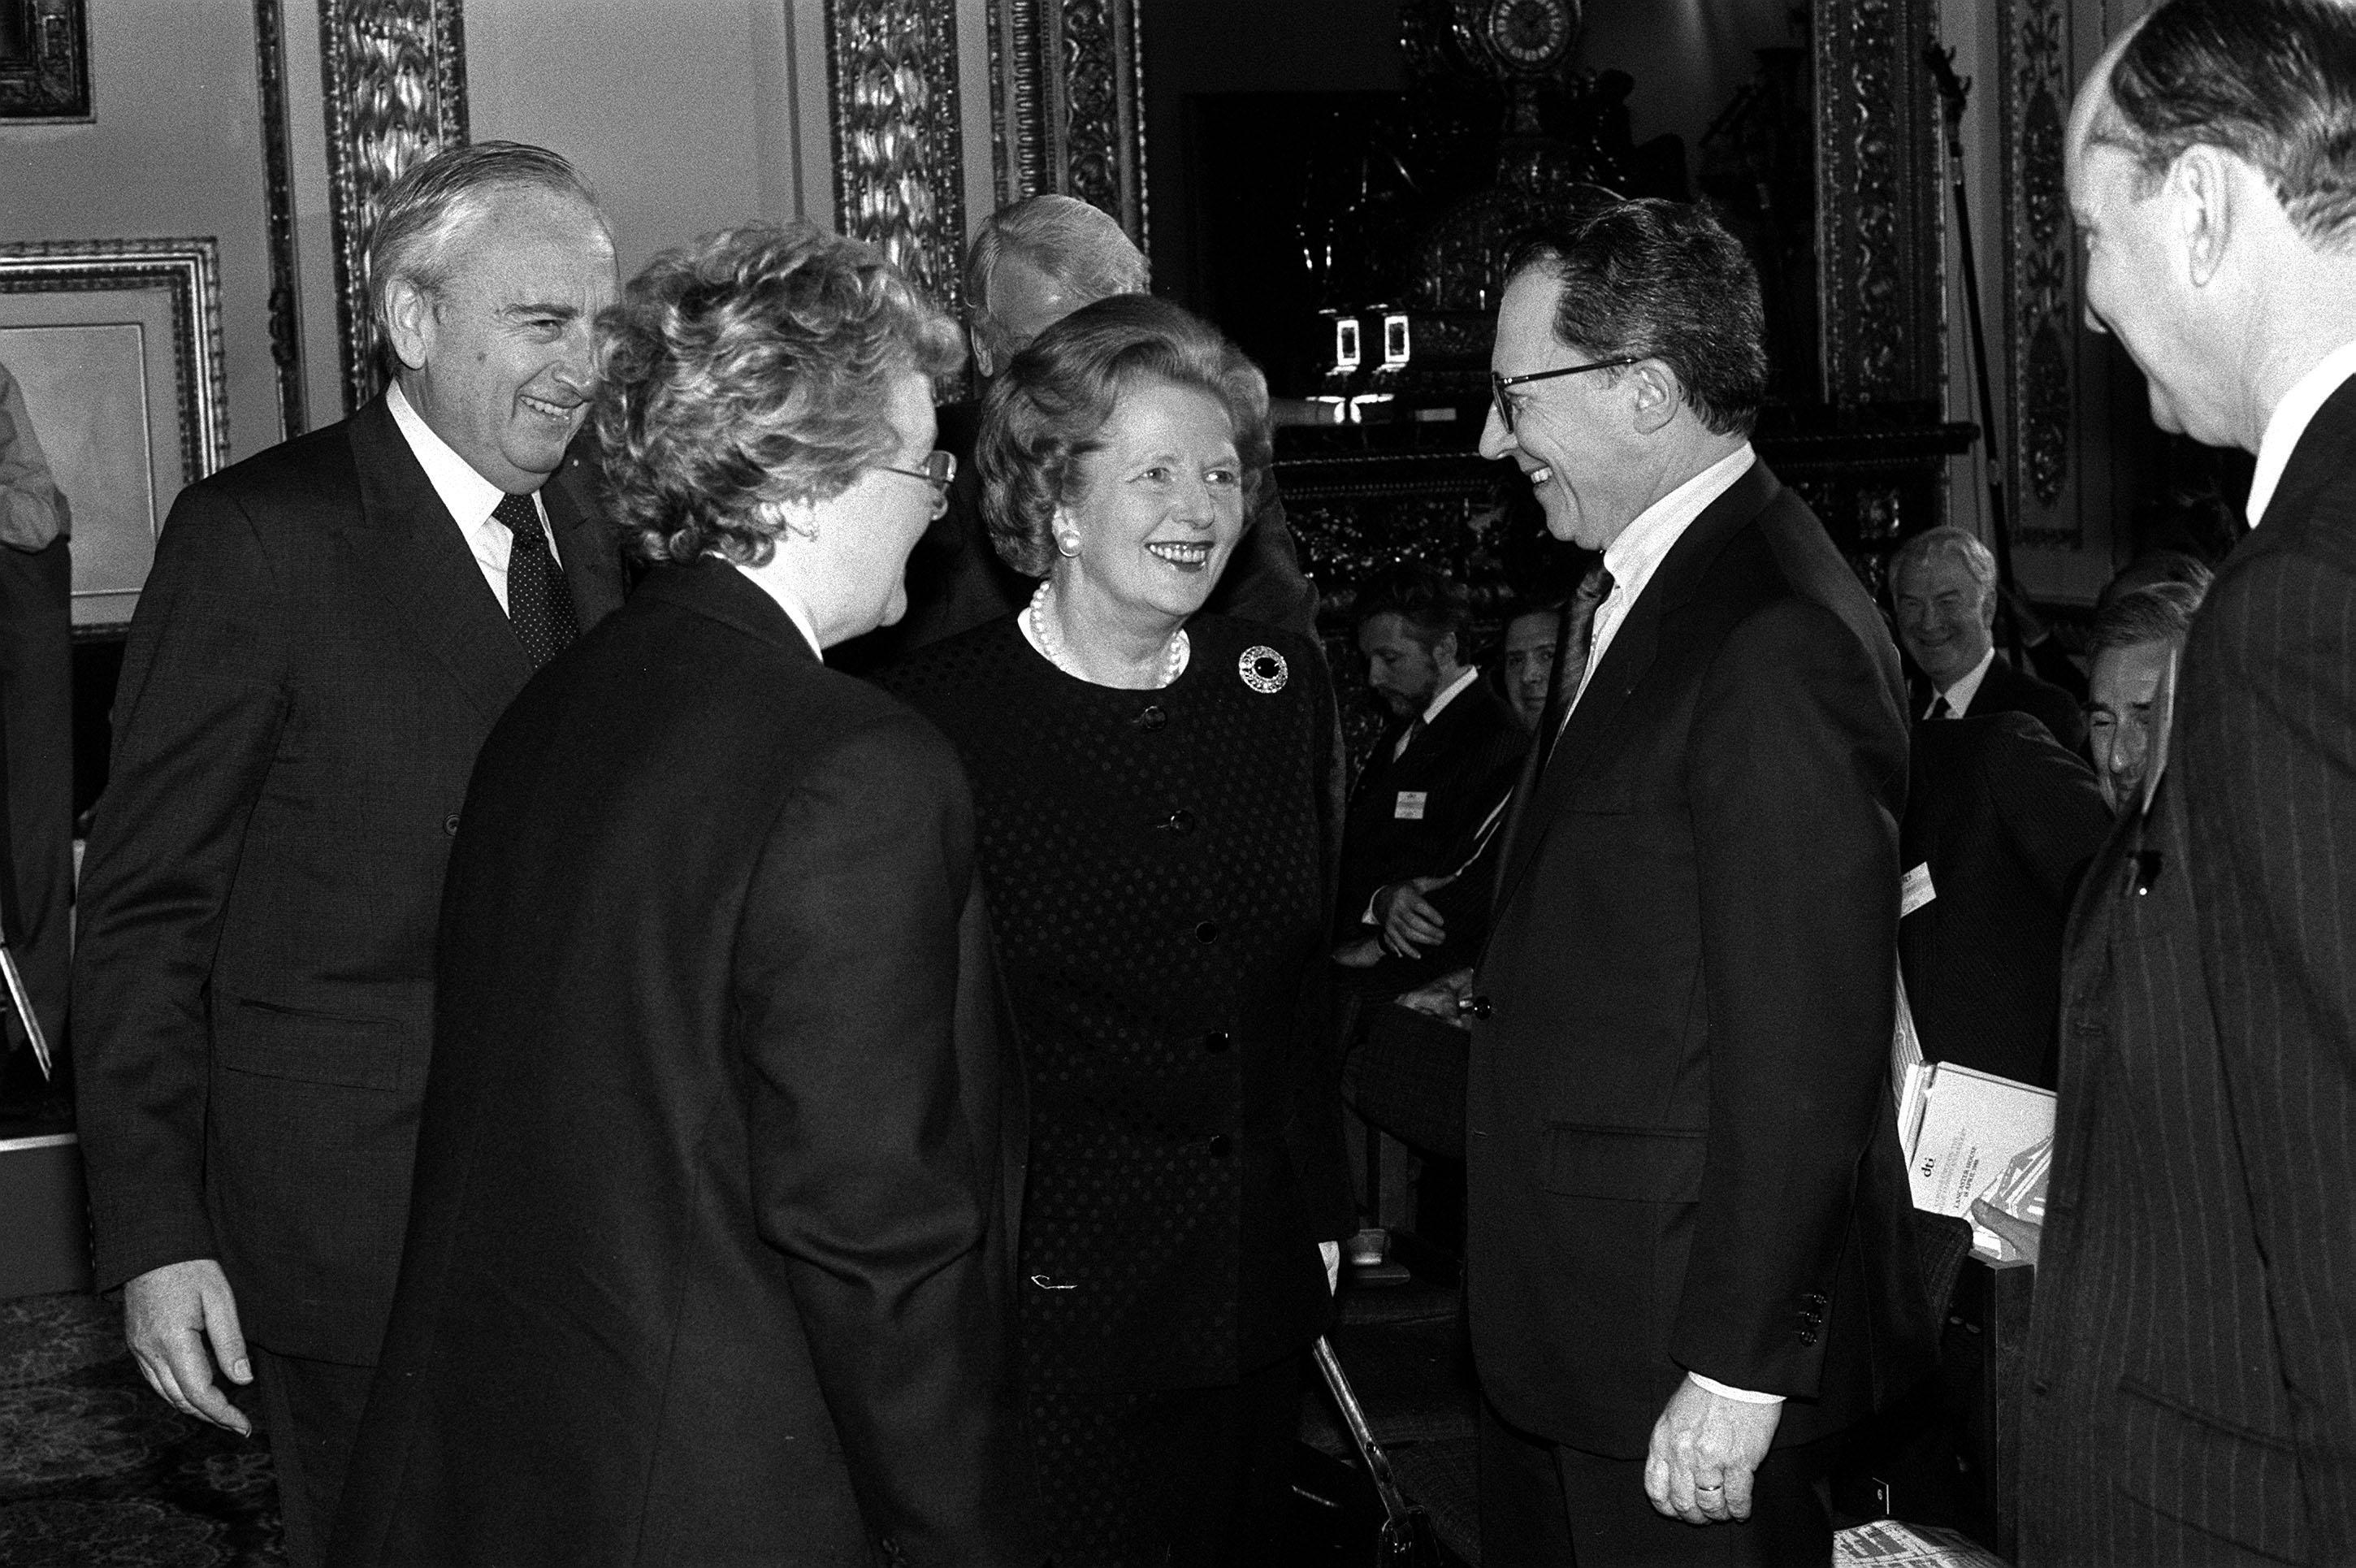 Margaret Thatcher greets Jacques Delors at the European Single Market conference in London, in 1988